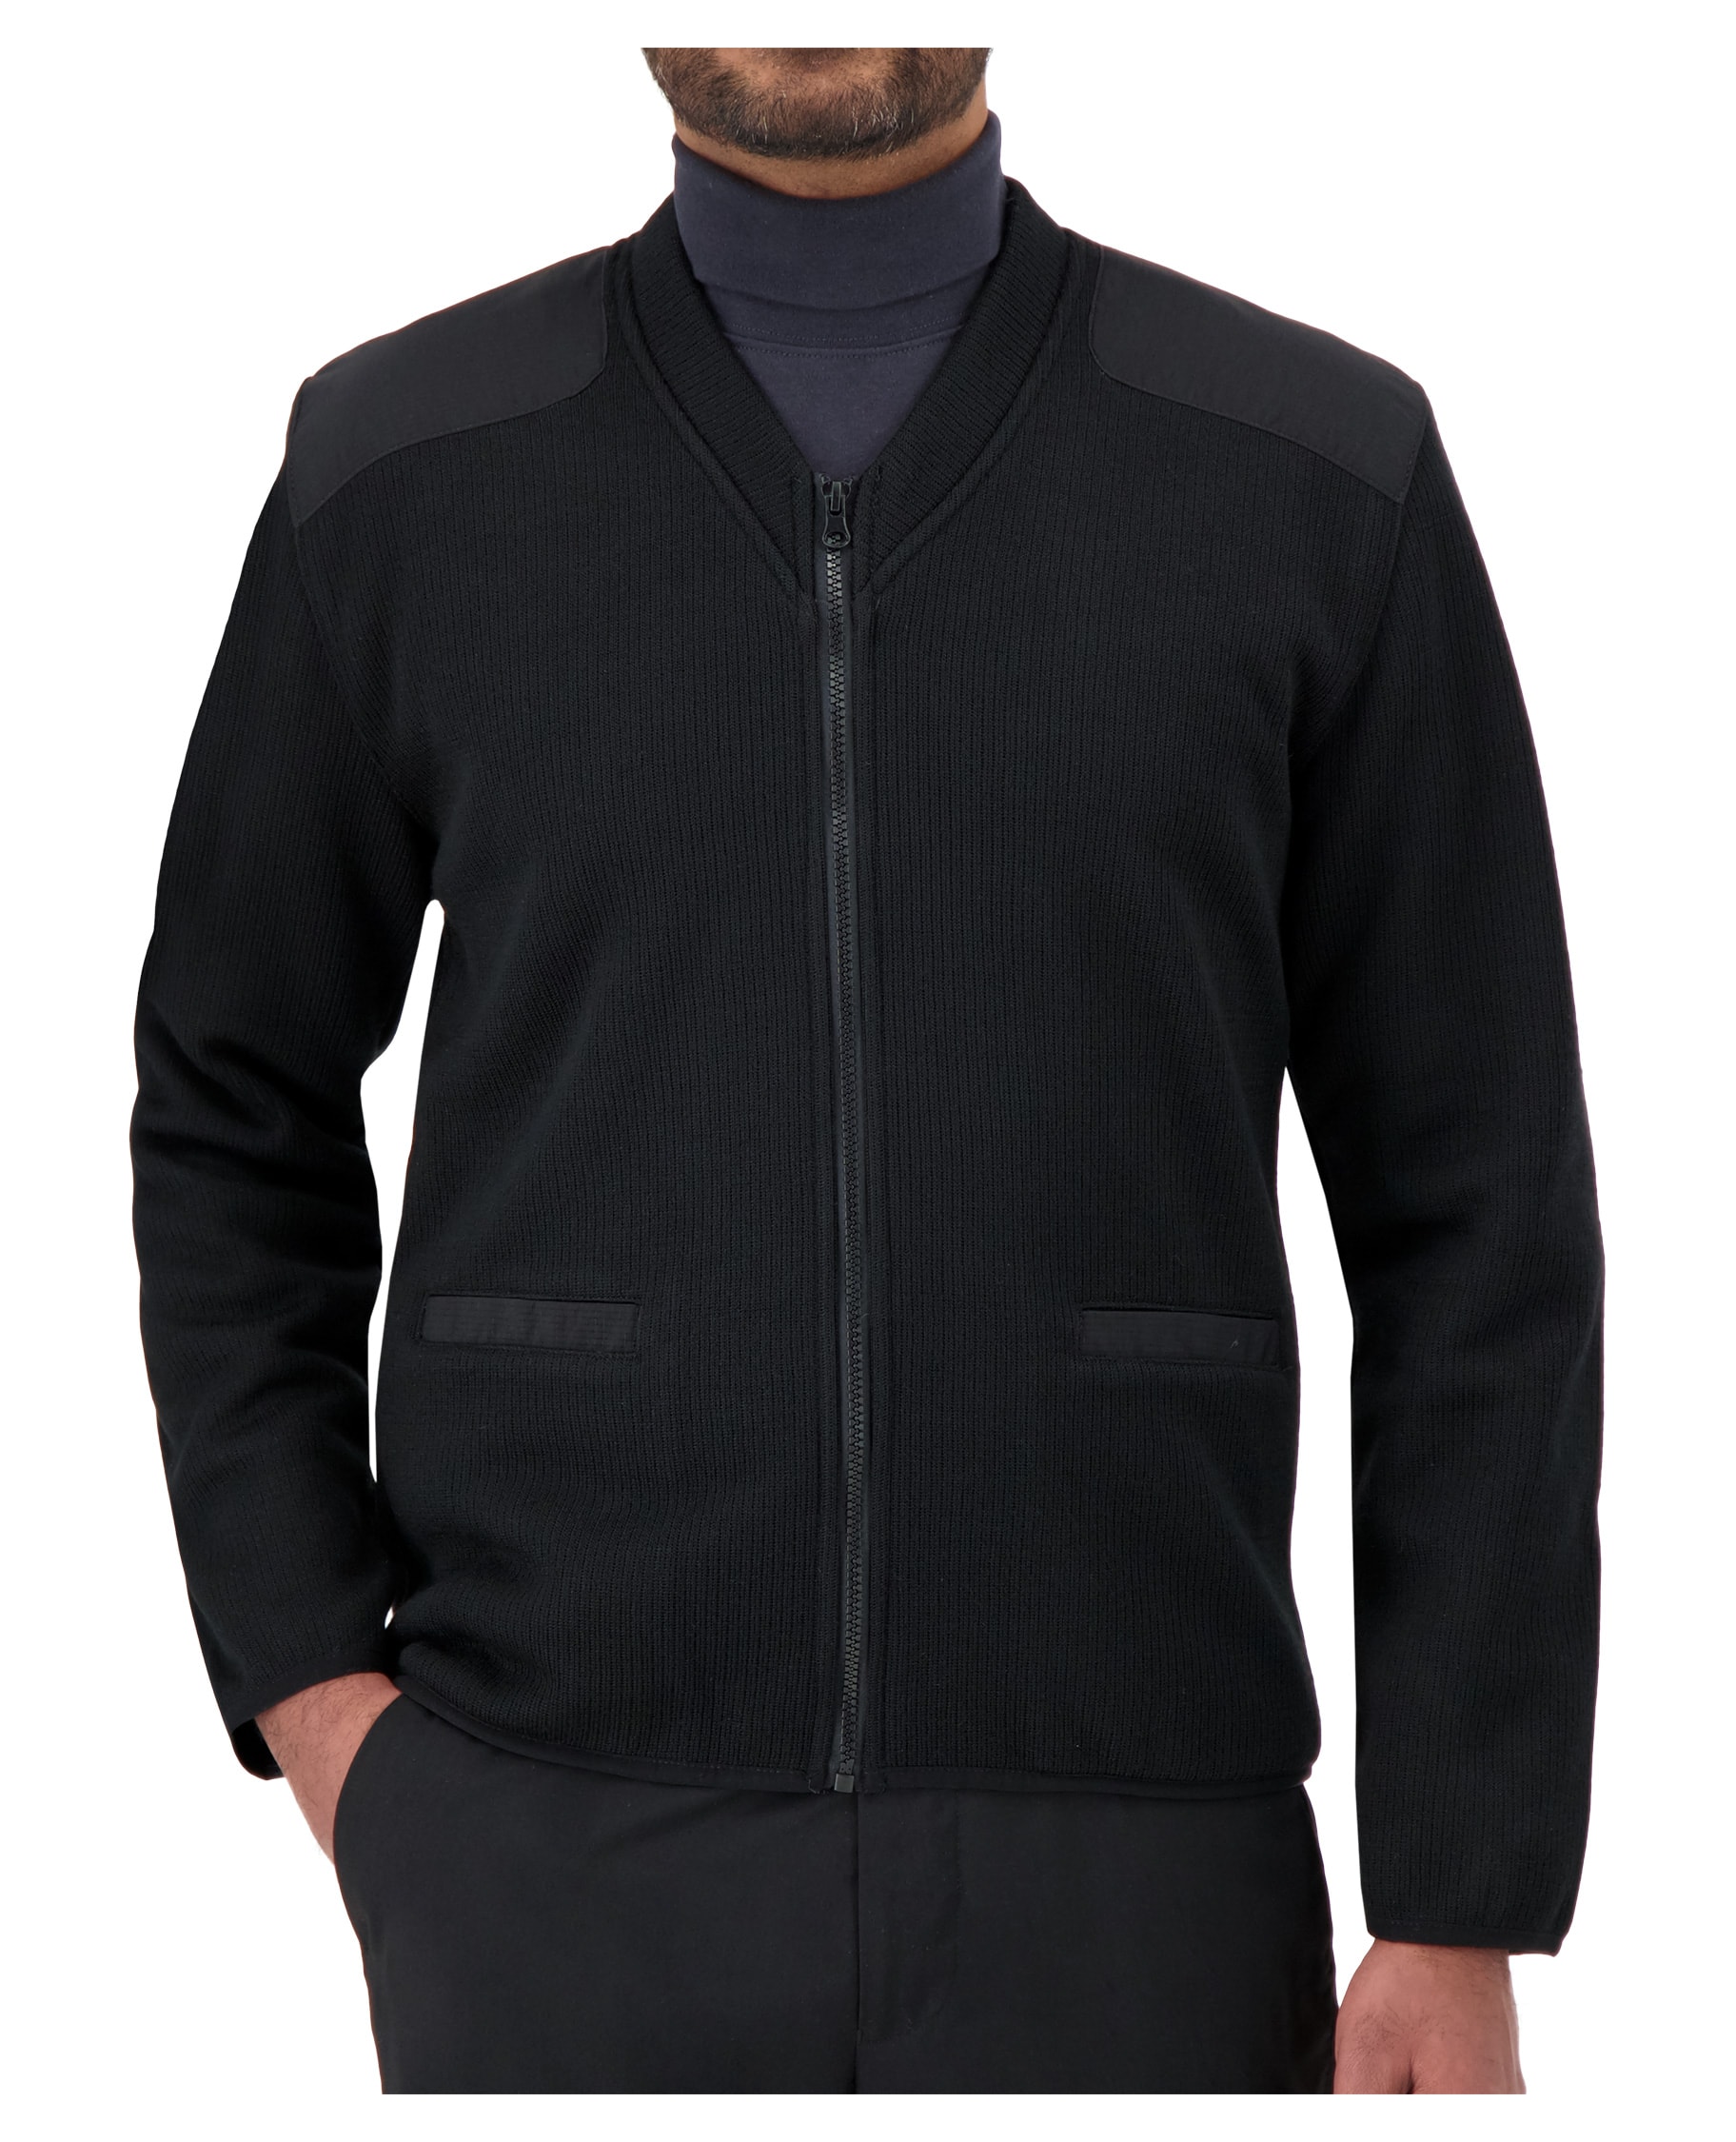 black v-neck zip up sweater with shoulder and elbow patches and pockets